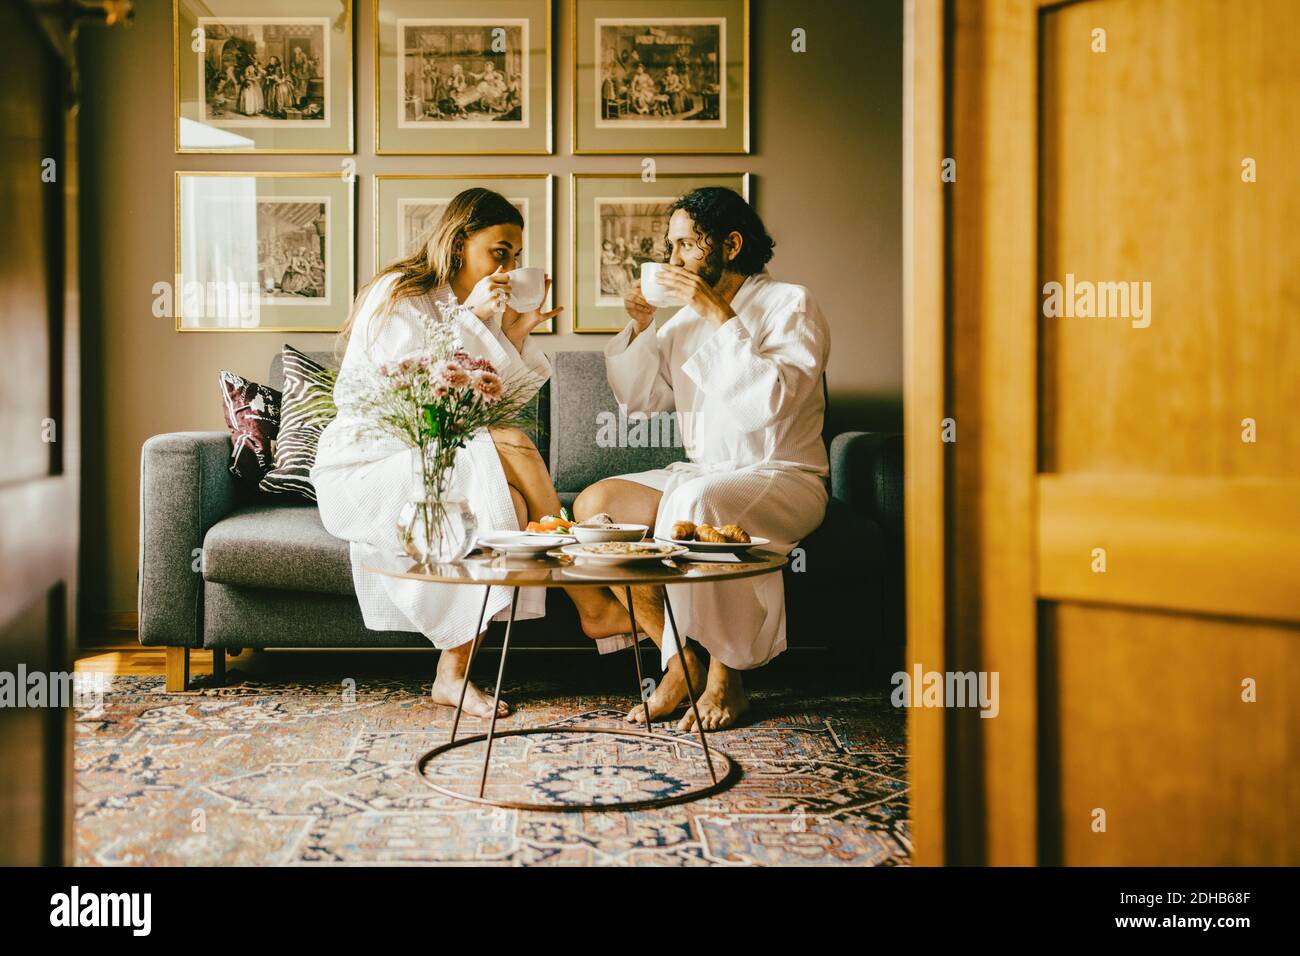 Couple in bathrobes drinking coffee while enjoying breakfast at hotel Stock Photo